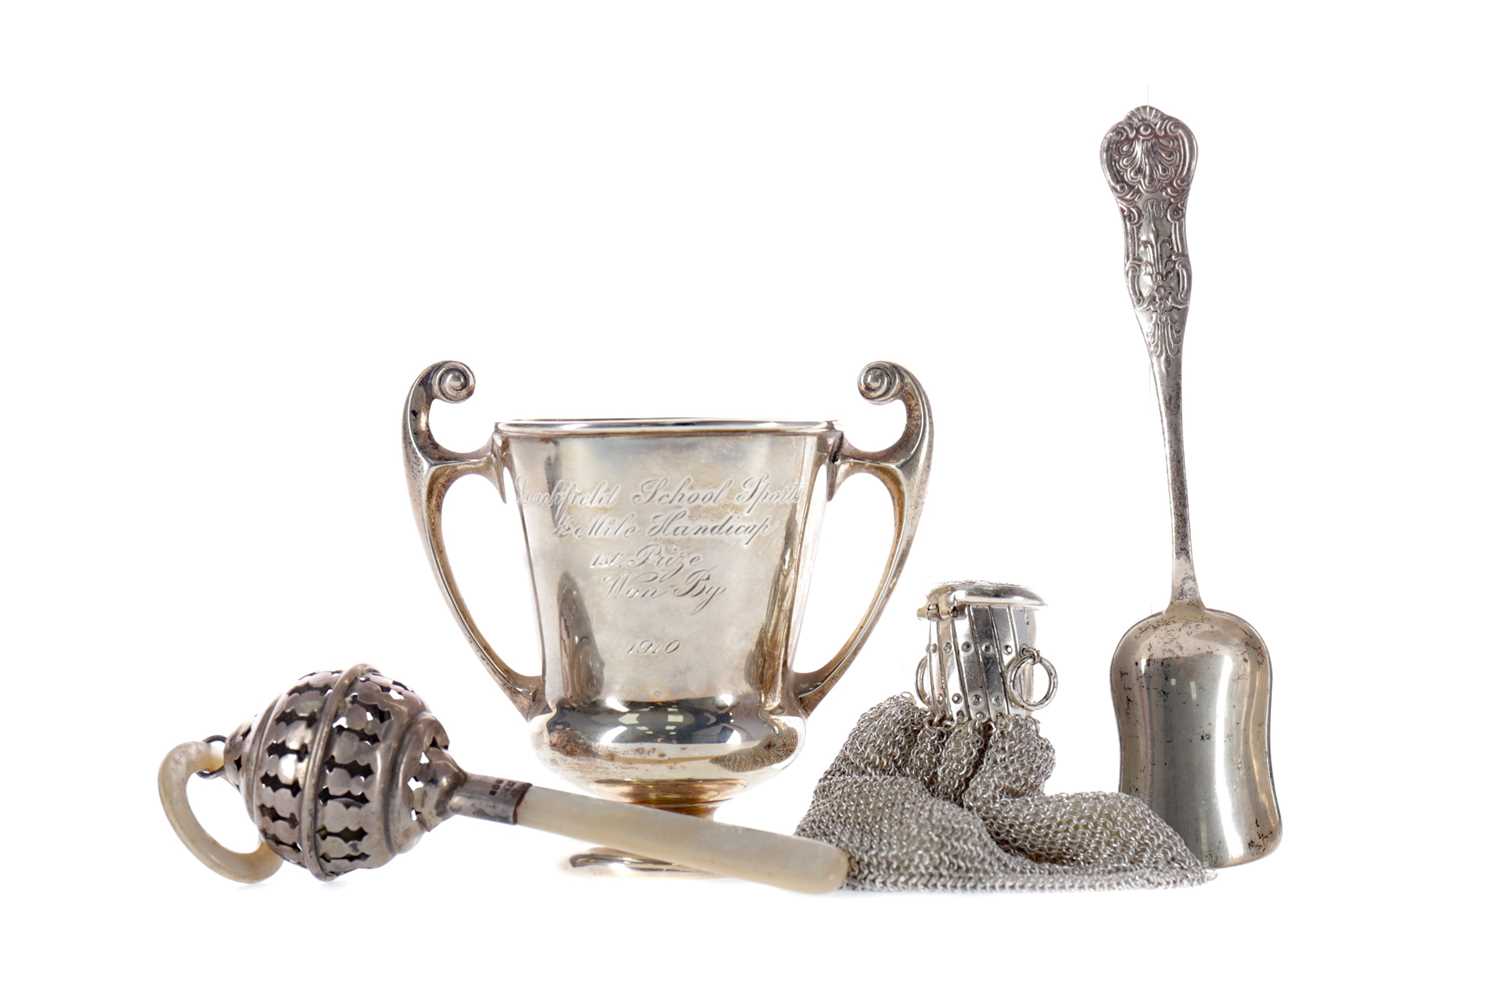 Lot 520 - AN EARLY 20TH CENTURY SILVER TROPHY CUP ALONG WITH A RATTLE, A SCOOP AND A PURSE